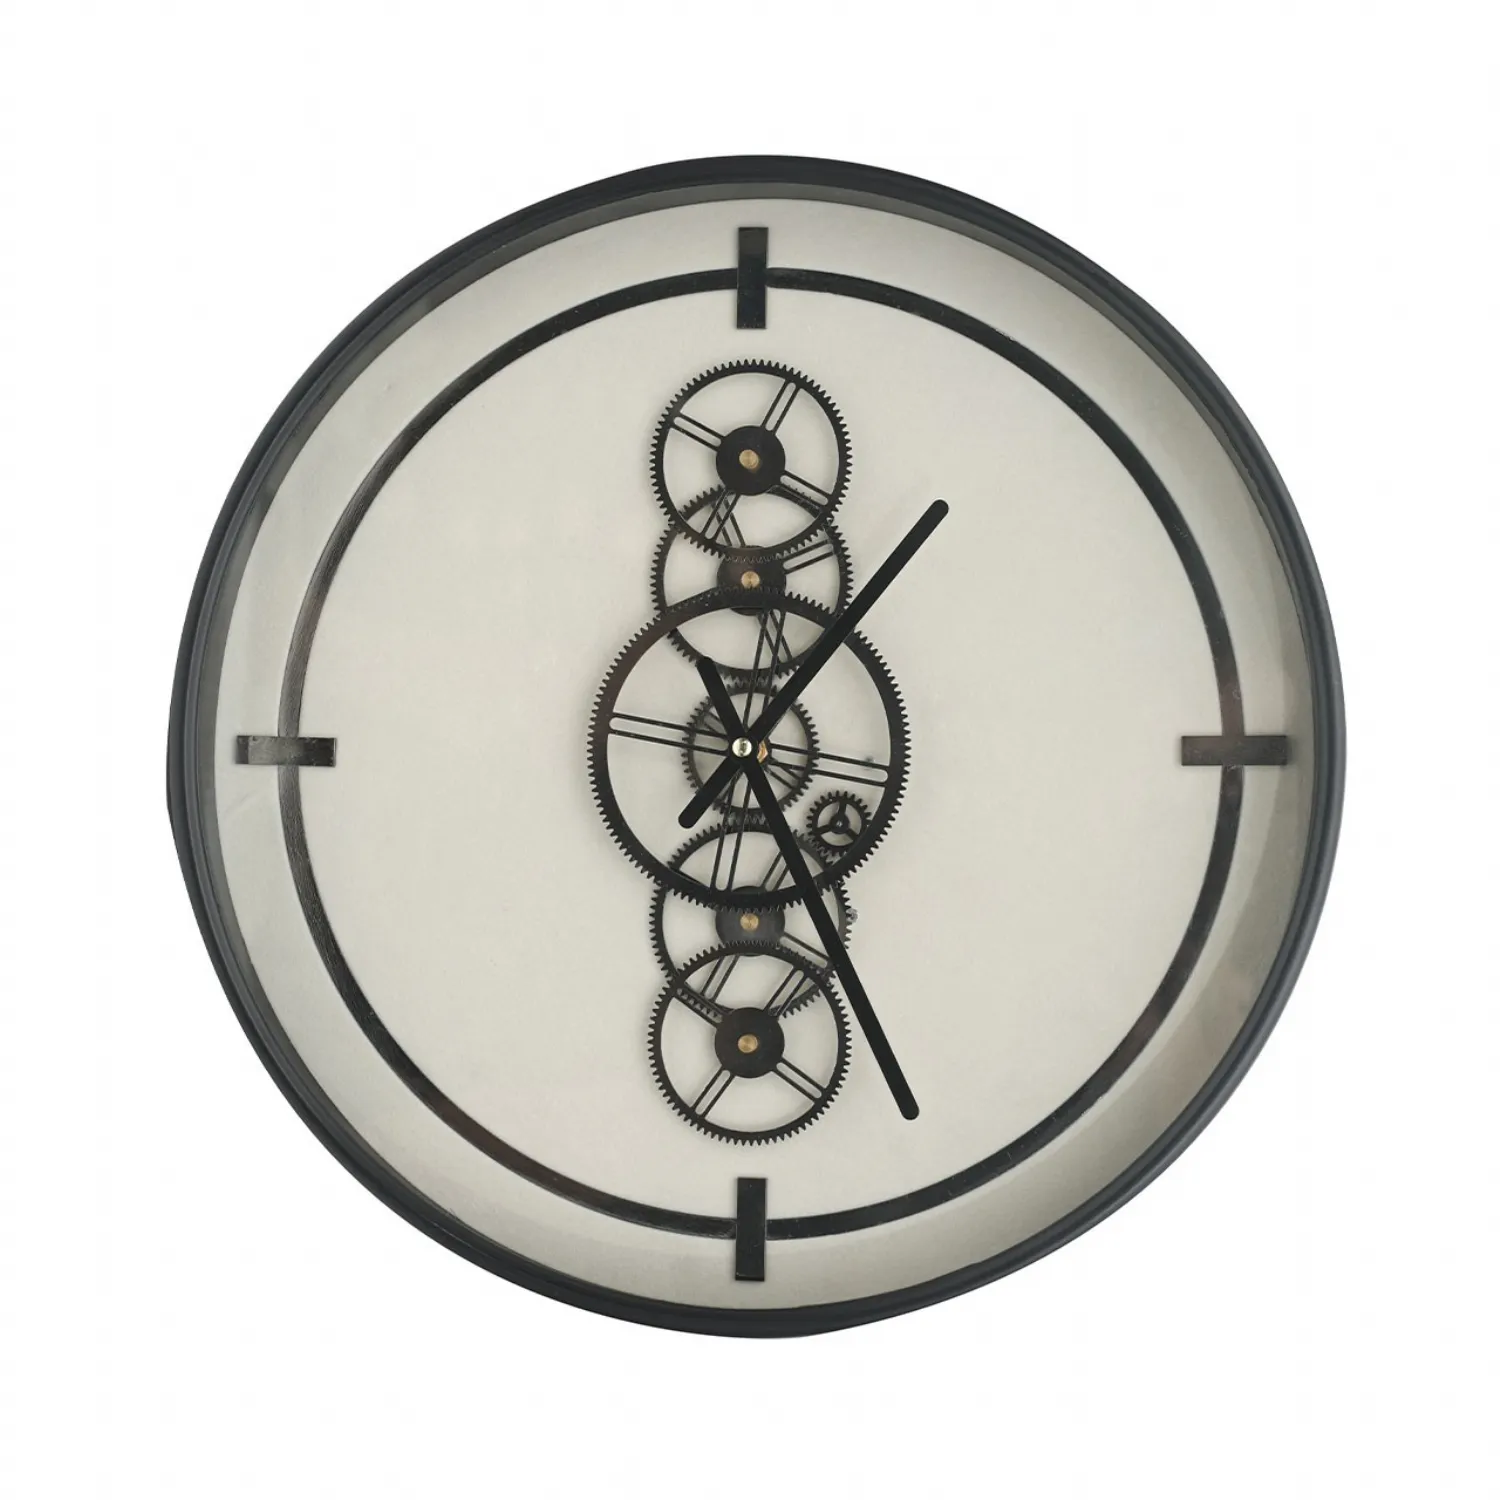 46cm Black And White Gears Wall Clock